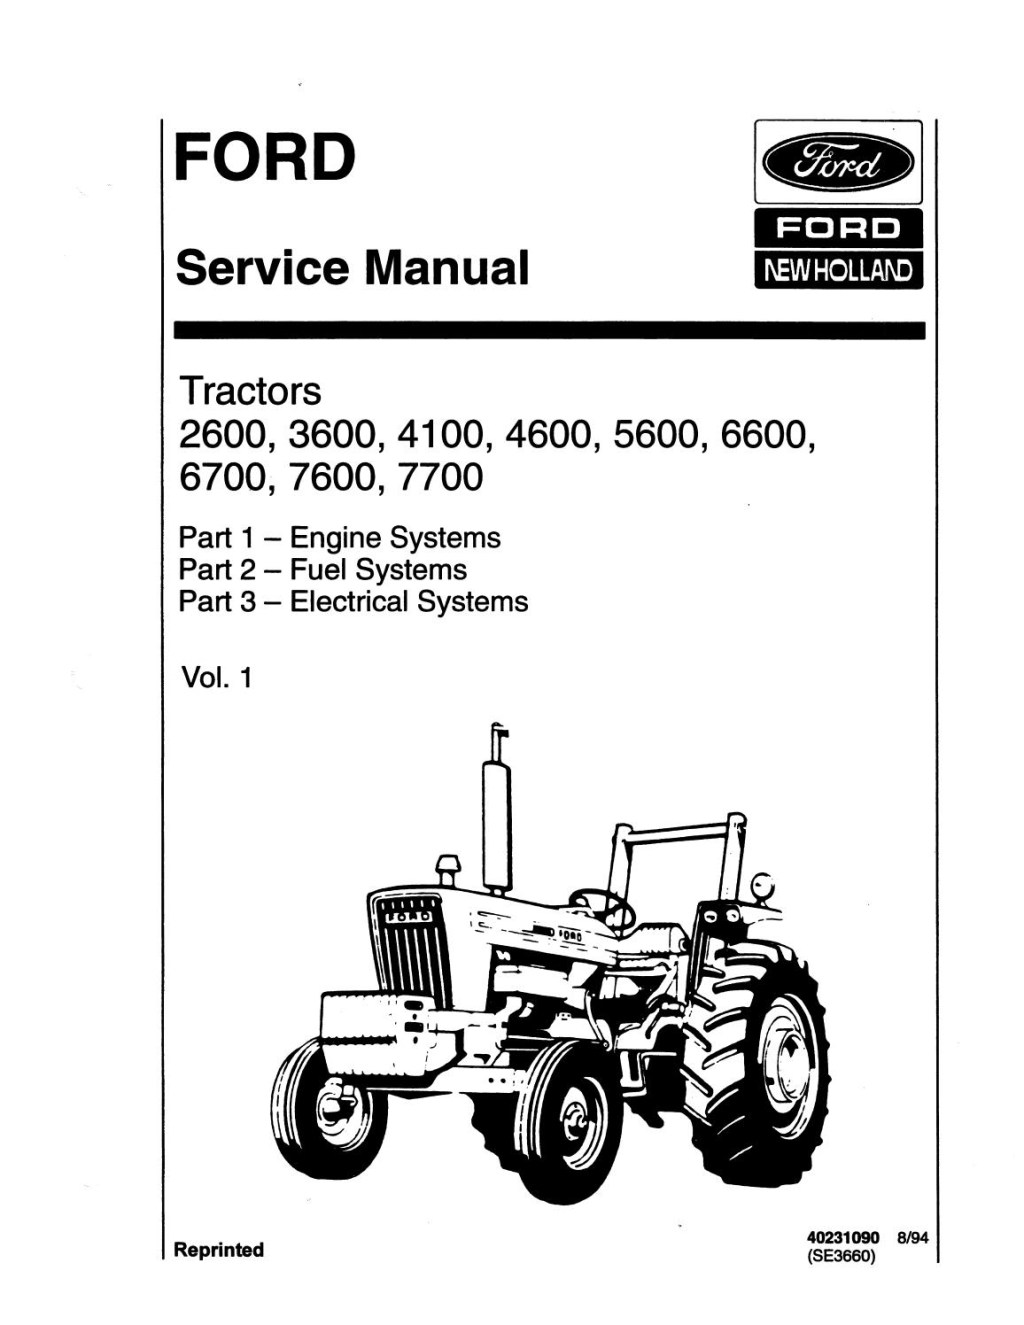 Picture of: Ford  Tractor Service Repair Manual by jiasha – Issuu